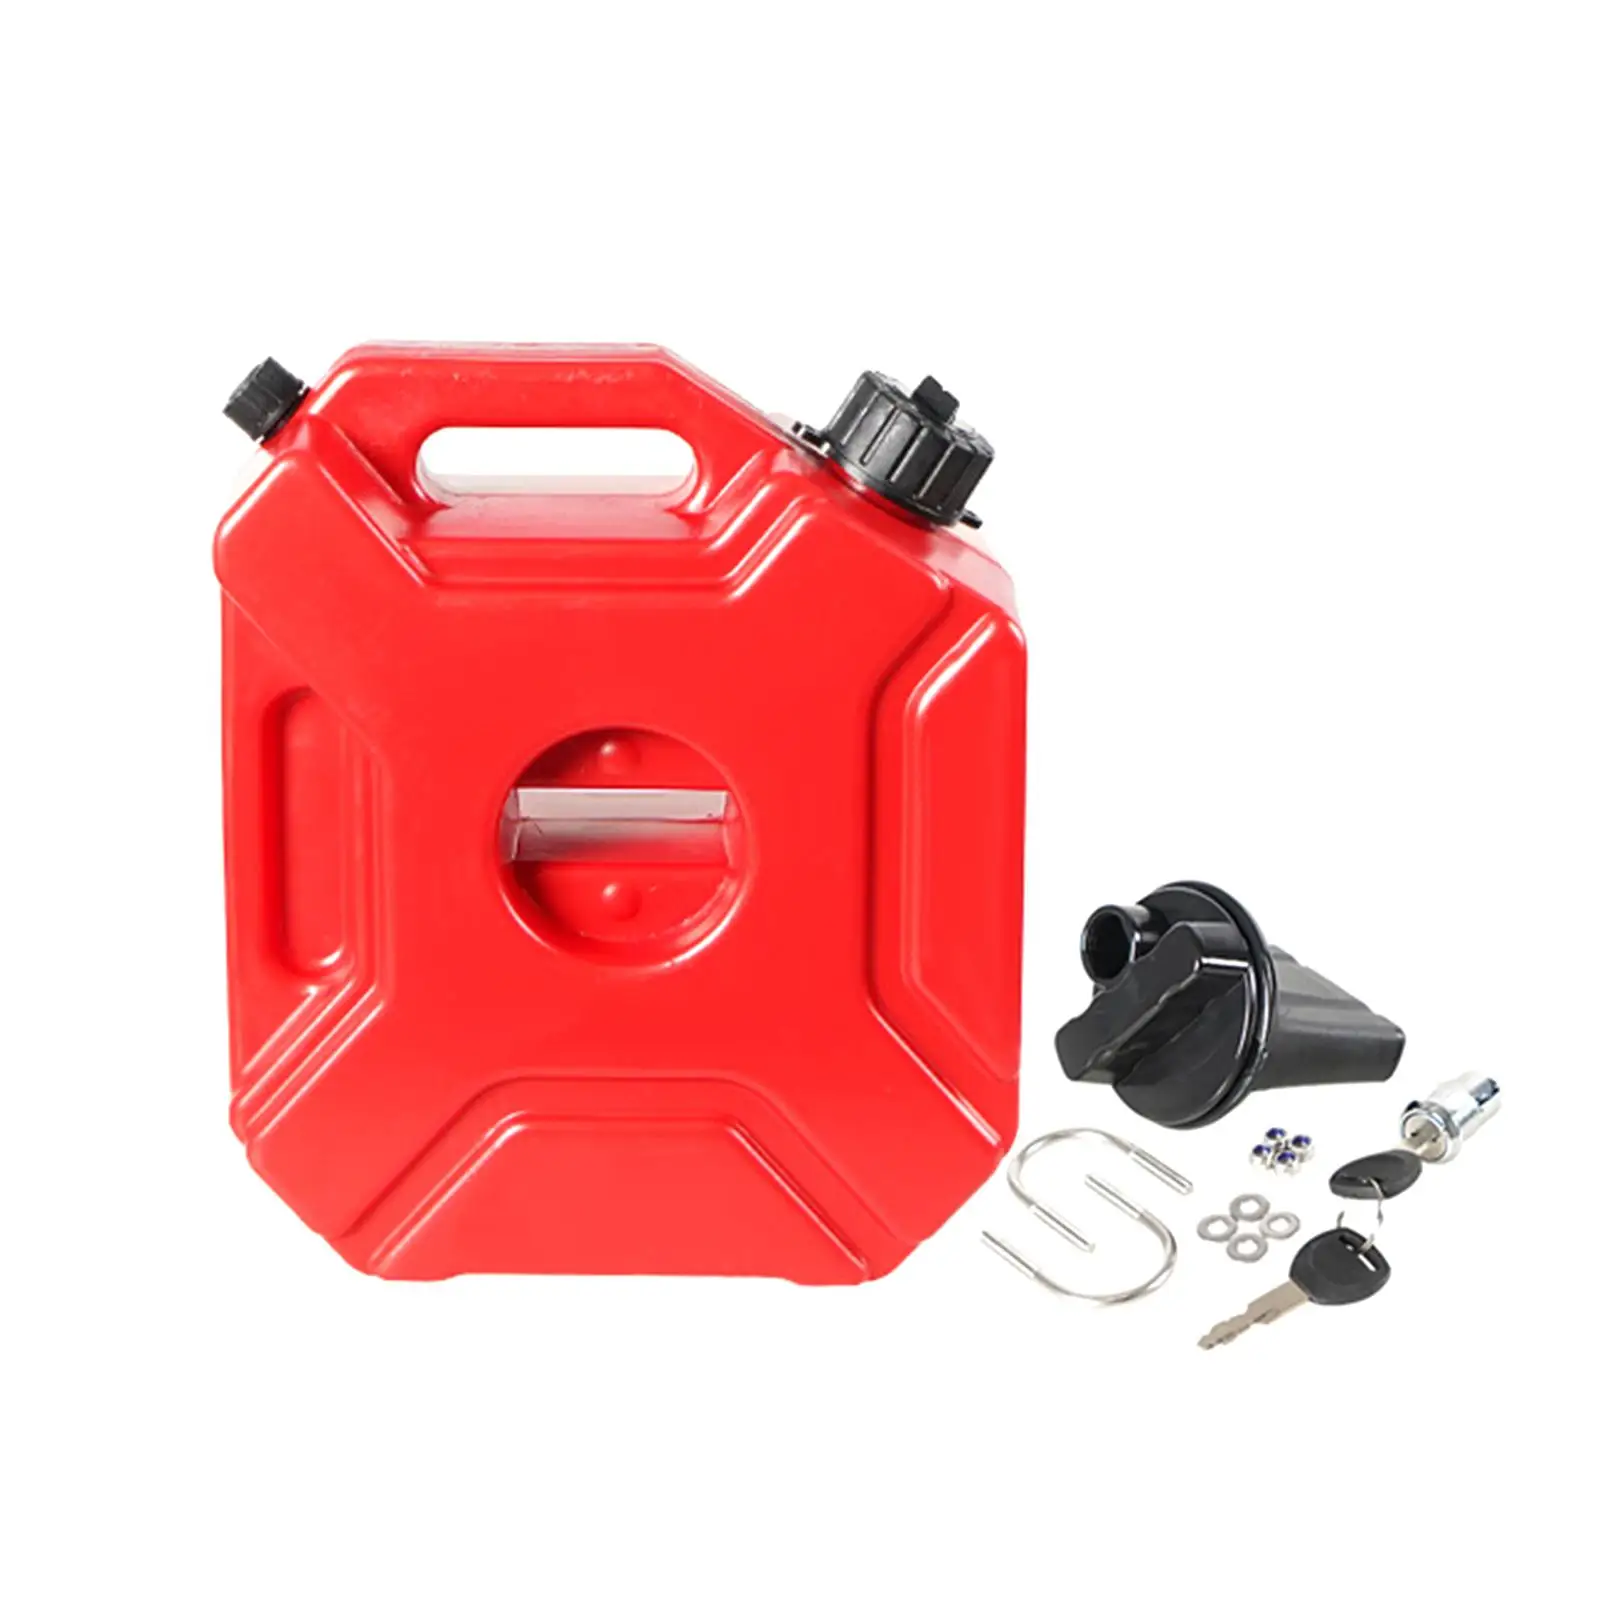 Petrol Tanks 5L with Lock Easily Install Gasoline Tank Spare Container for Moto Most Cars Car Travel SUV Accessories